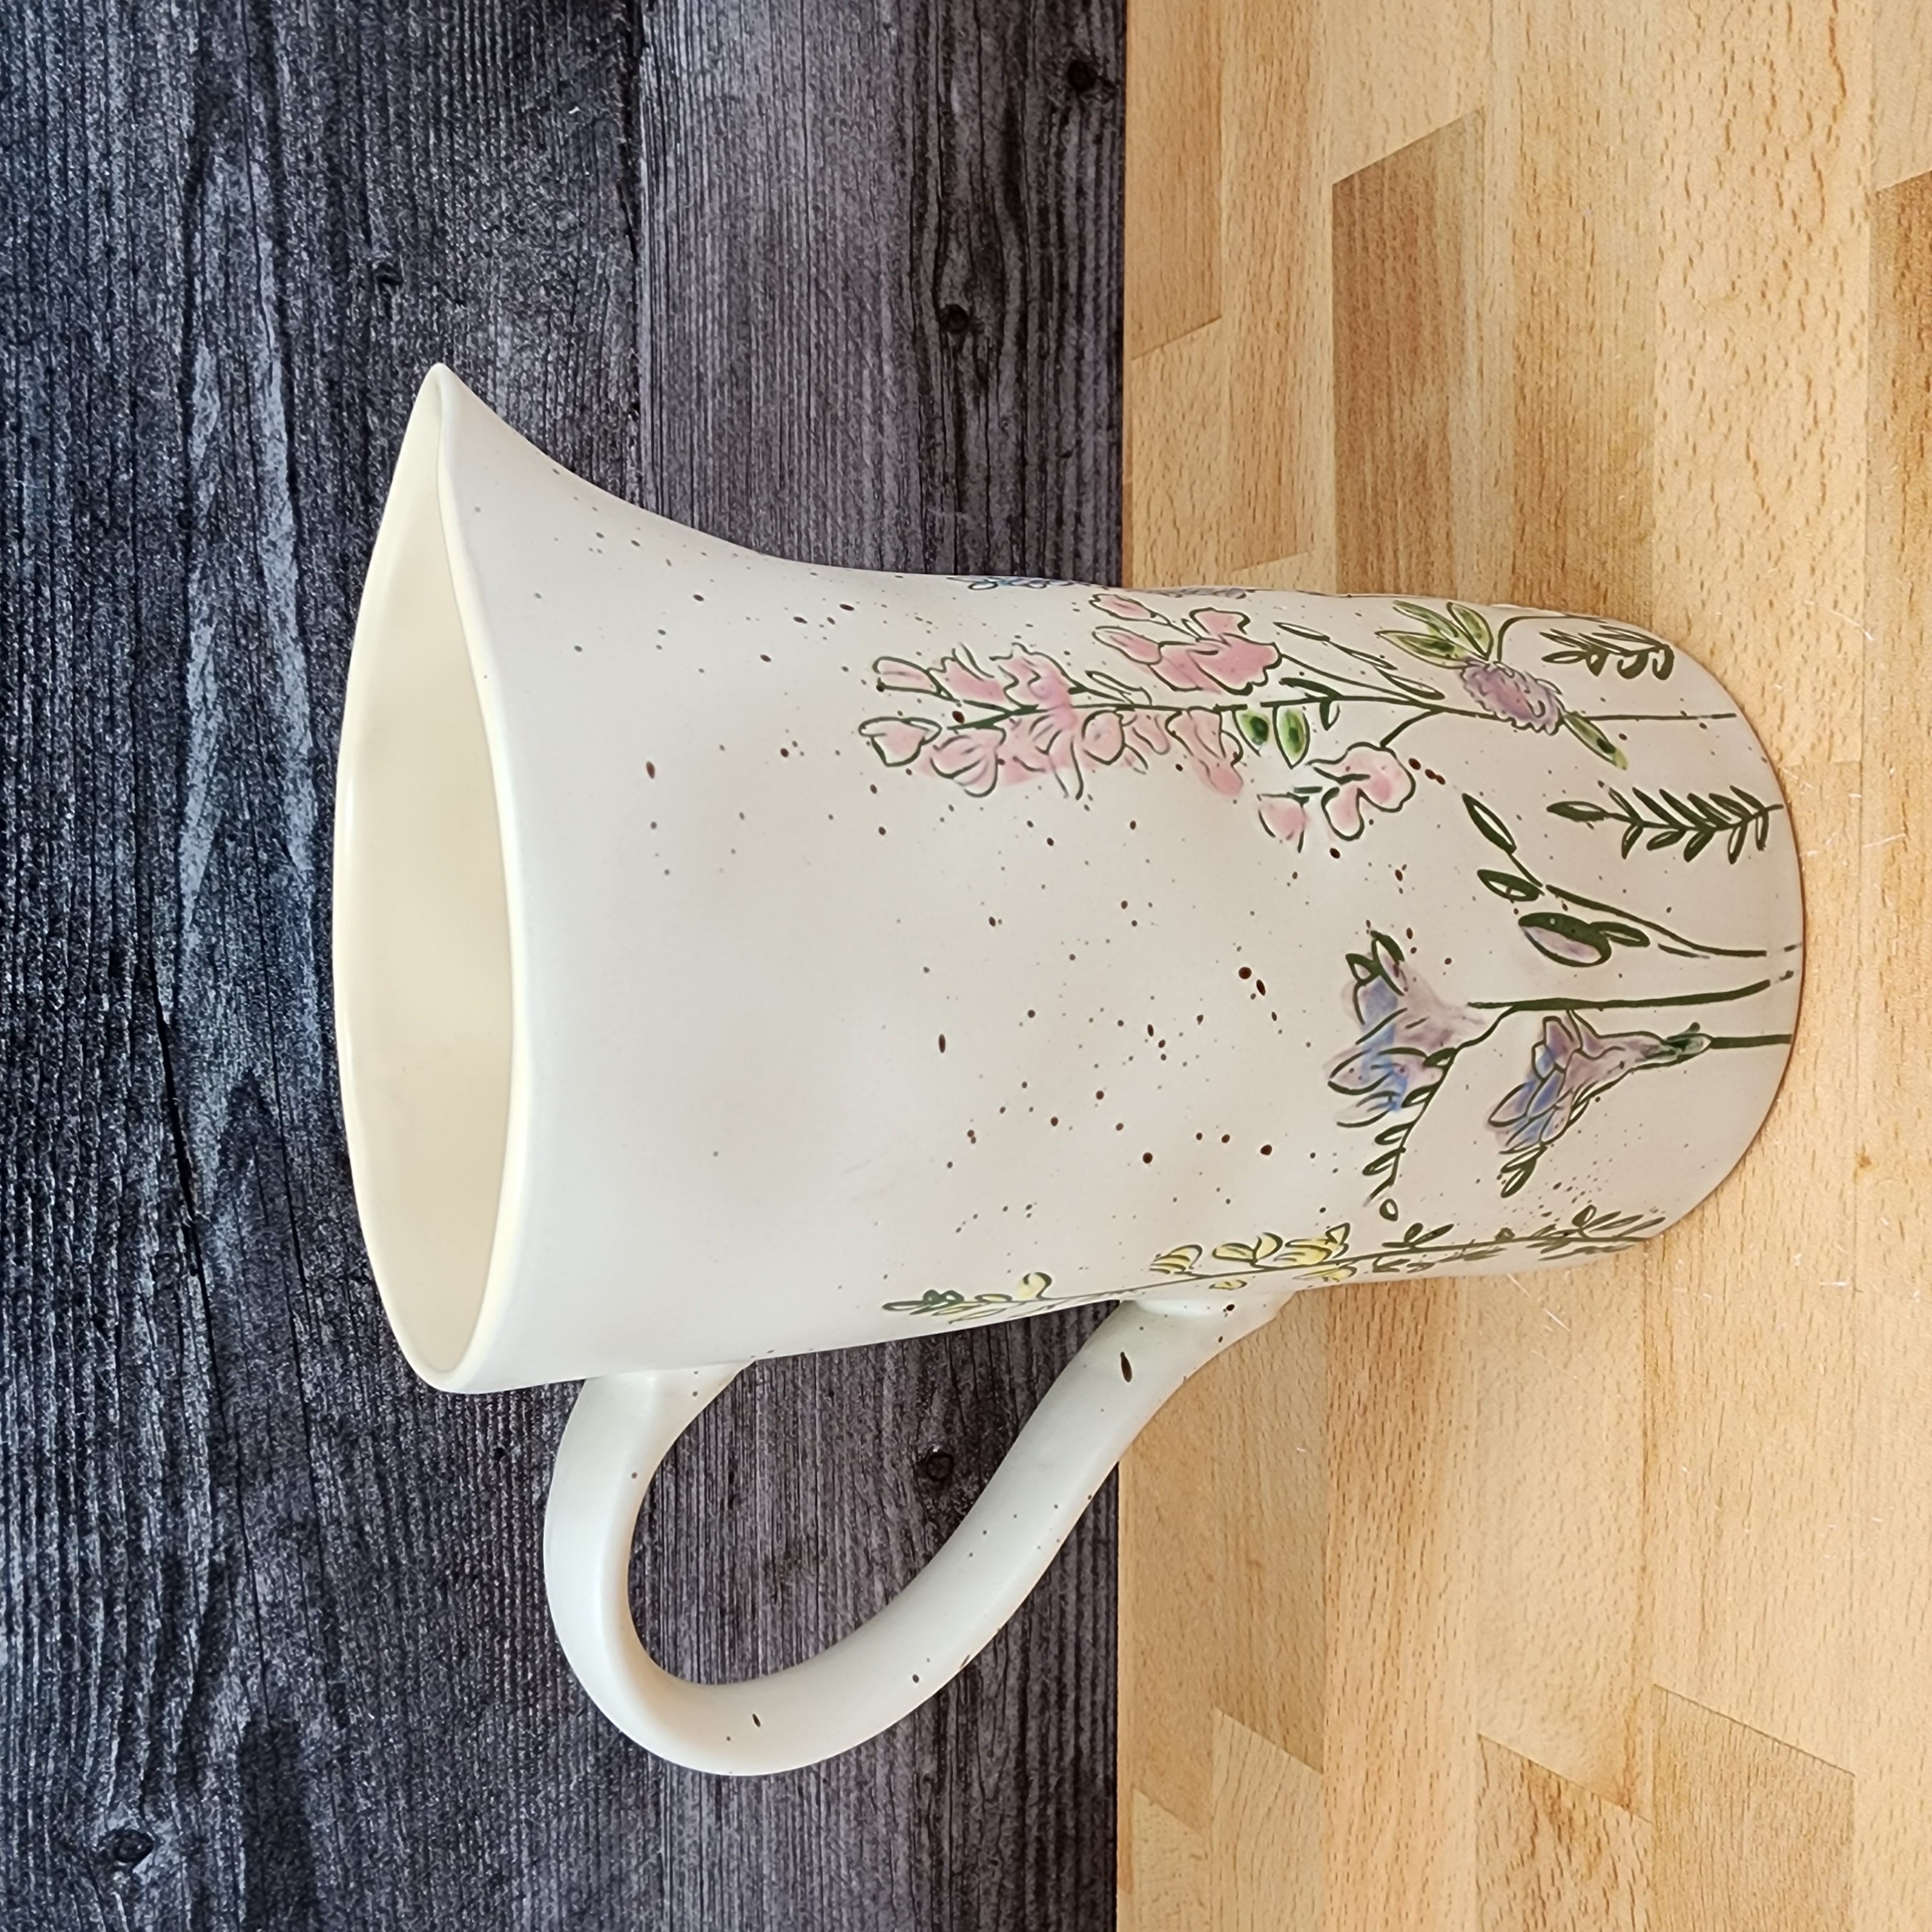 This Garden Spring Flowers Embossed Pitcher Decorative Floral Home by Blue Sky is made with love by Premier Homegoods! Shop more unique gift ideas today with Spots Initiatives, the best way to support creators.